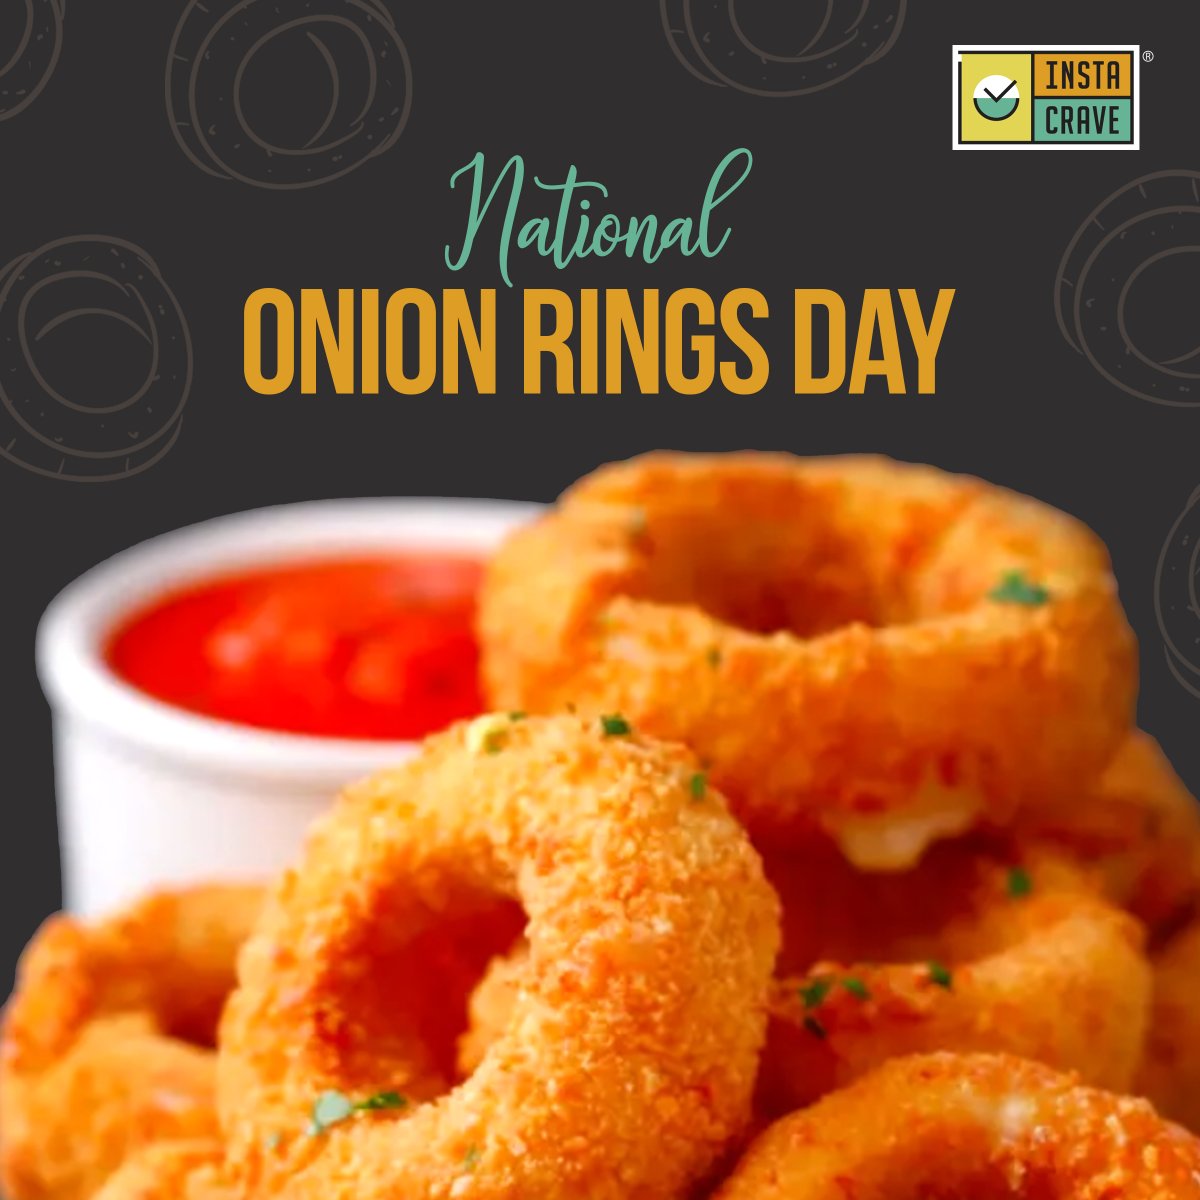 It's National Onion Rings Day 😍😍♥️♥️
.
.
.
#Instacrave #nationalonionringsday #onionrings #onions #onionsringsforlife #foodies #foody #foodyoulove #foodiesofinsta #foodheaven #foodinspiration #foodoftheday #foodforthought #MondayVibes